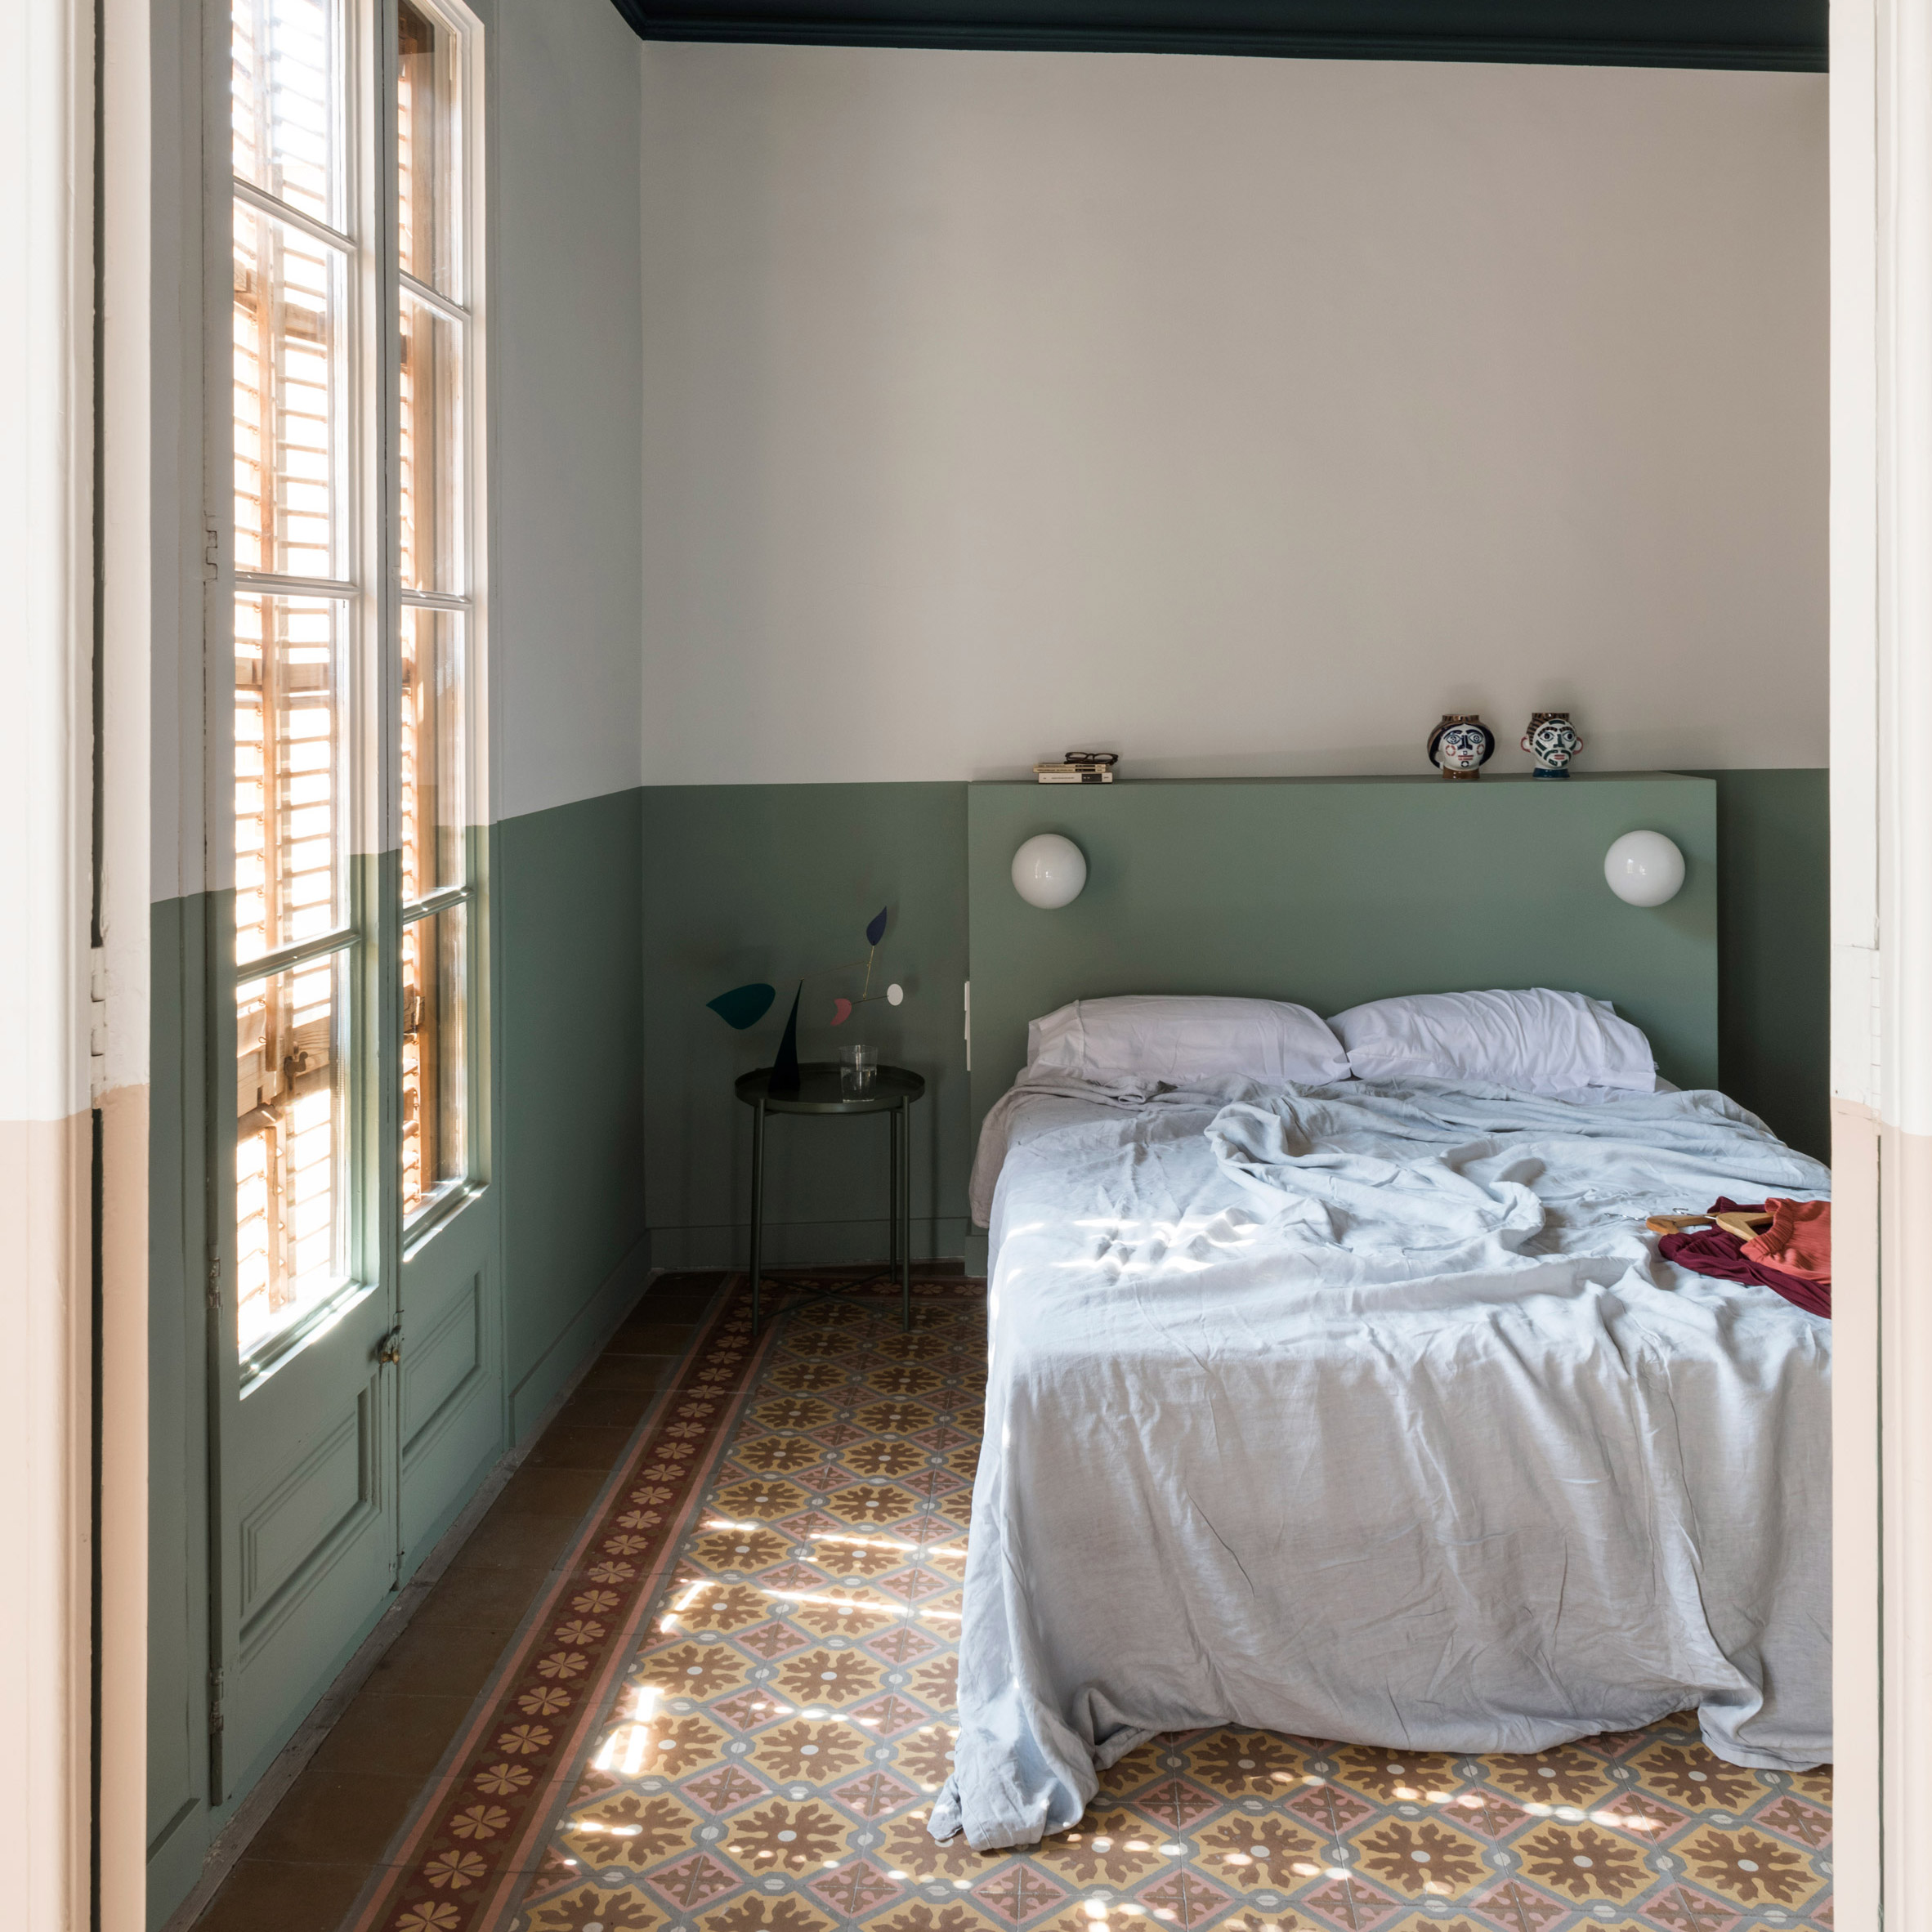 Bedroom in Klinker Apartment, Spain, by Colombo and Serboli Architecture